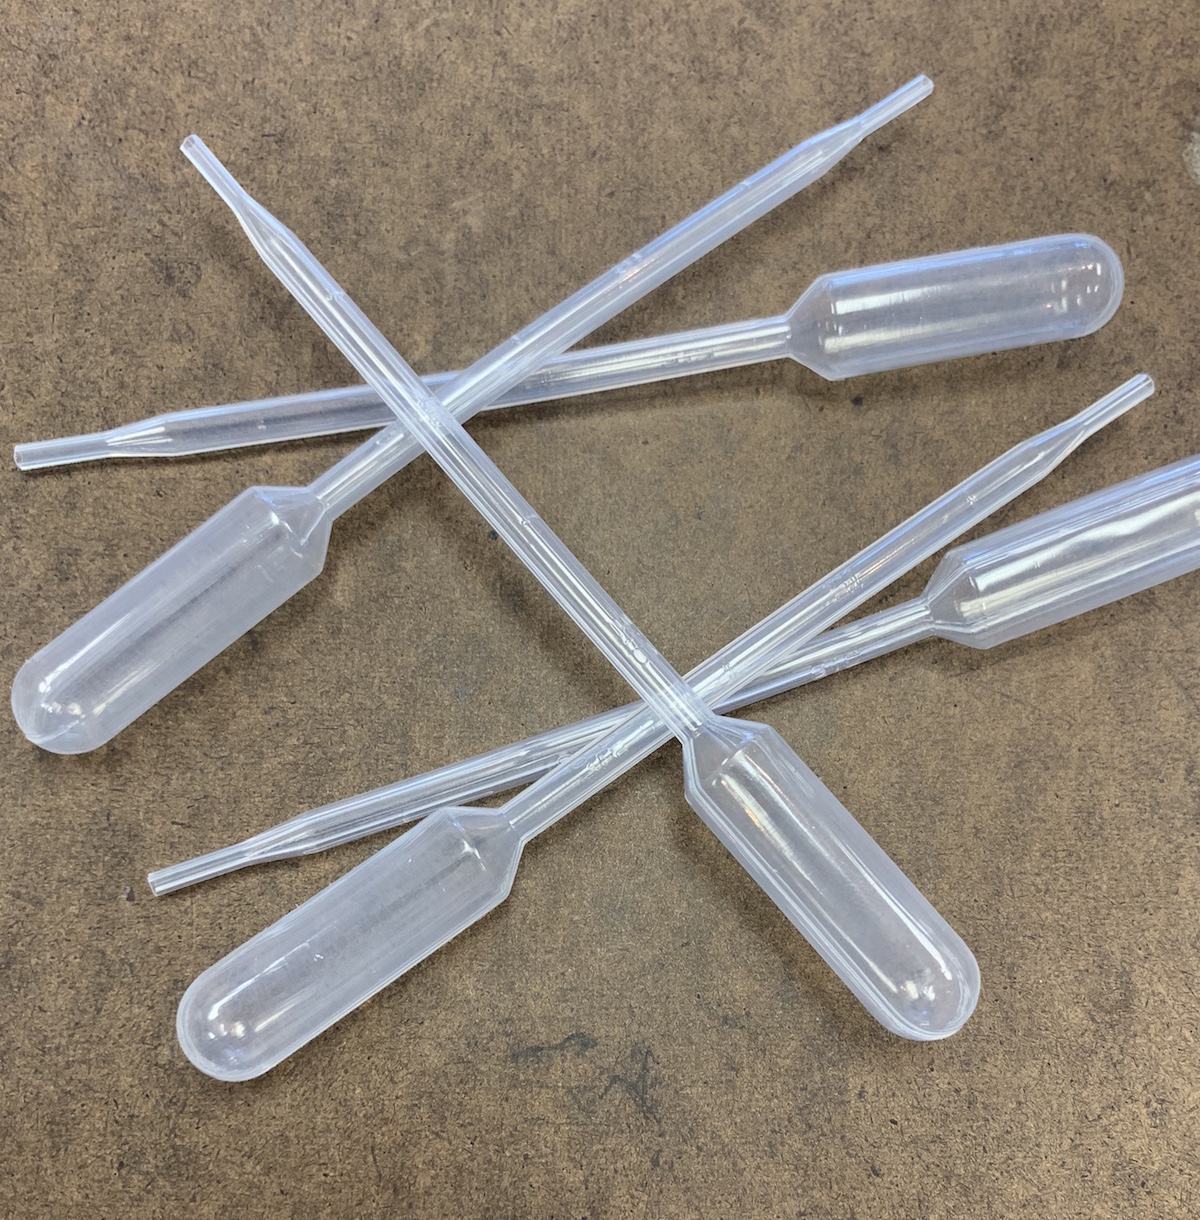 Pipettes 5mL (Bag of 6 pcs) Size & Fit Guide 